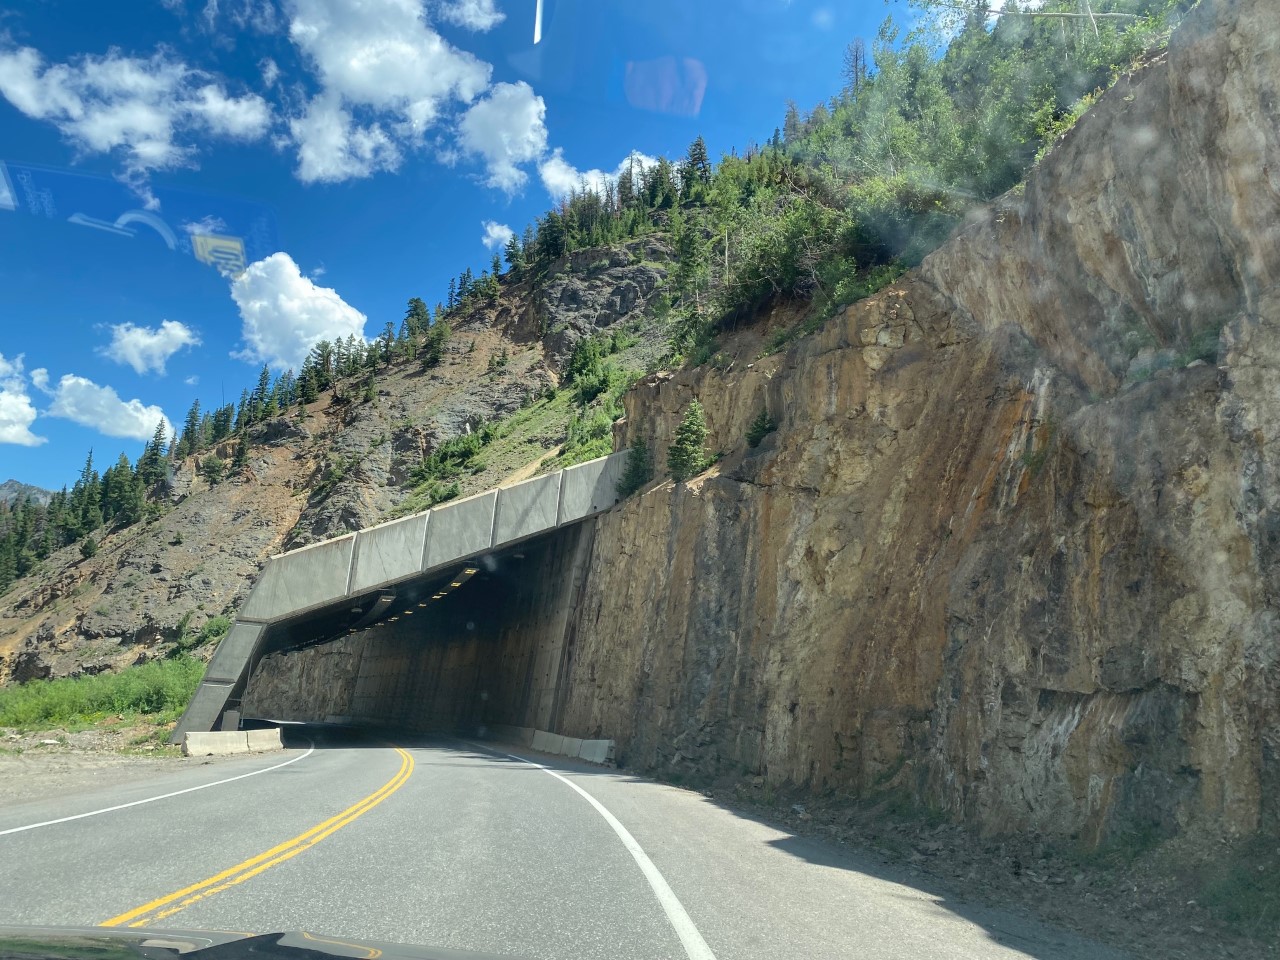 Yes, serveral tunnels are cut into the hillsides on the way to Ouray.